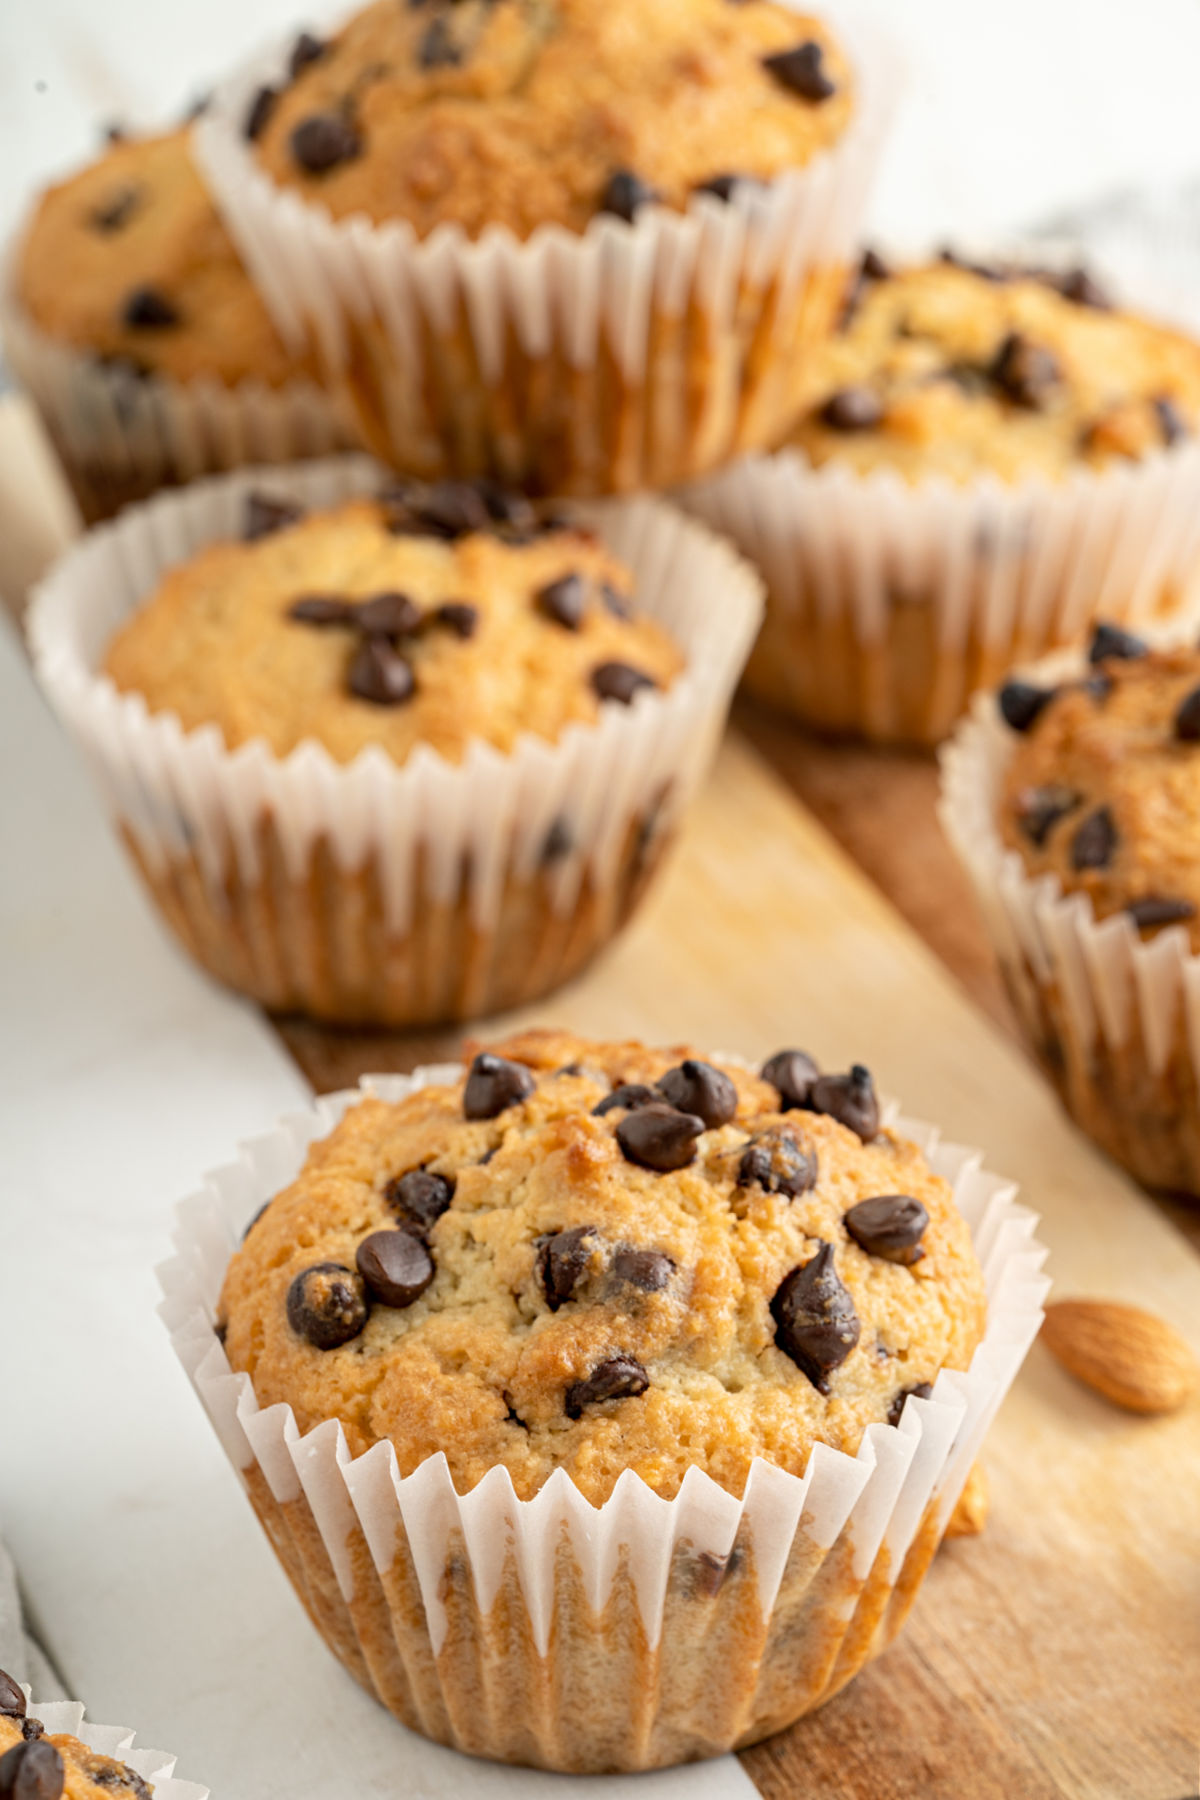 Chocolate chip muffins on a wooden board.